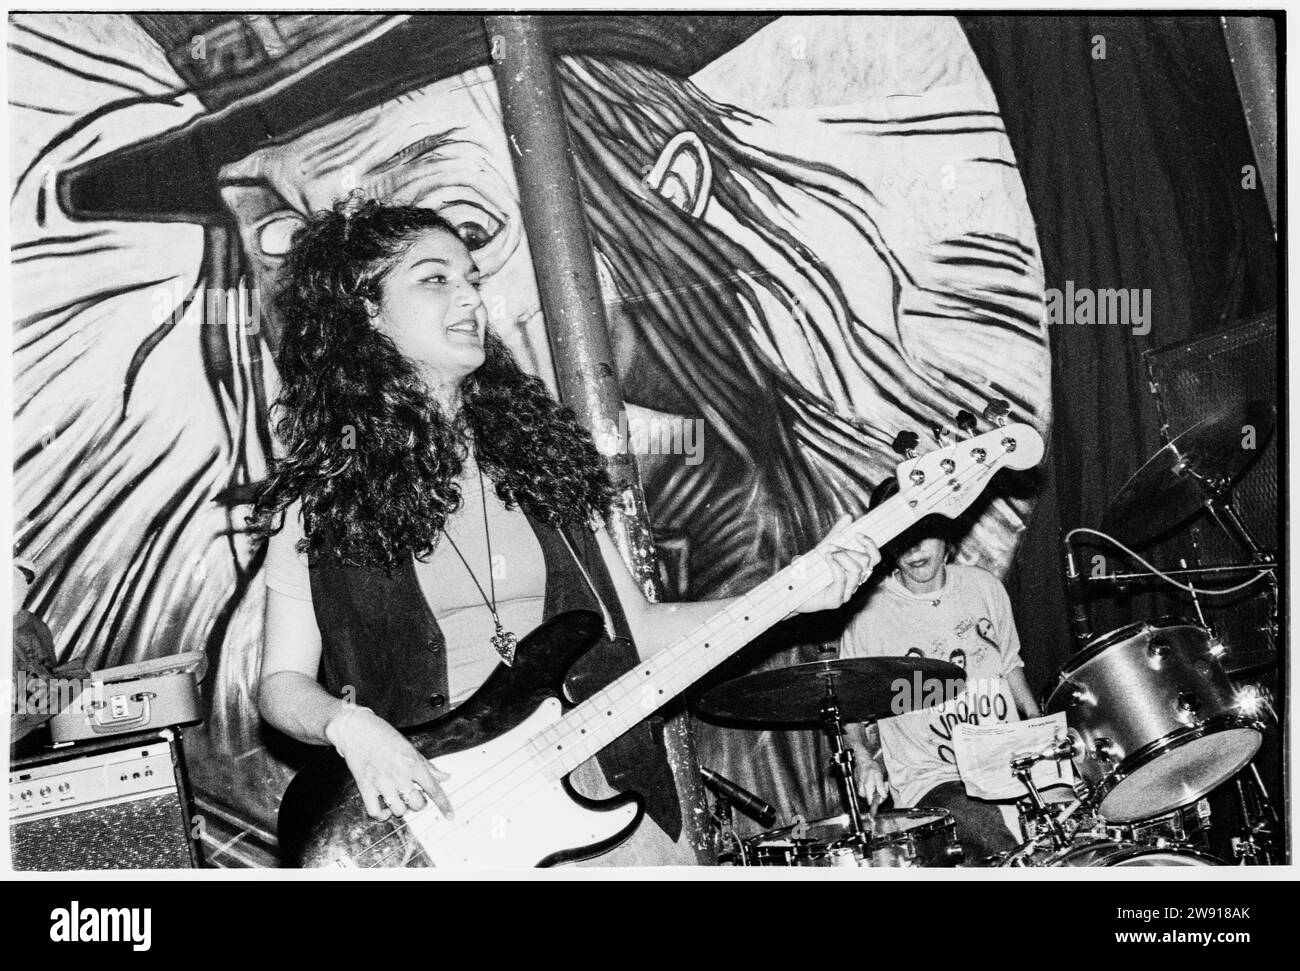 VOODOO QUEENS, BRISTOL FLEECE, 1993: Anjula Bhaskar bass player with The Voodoo Queens play Bristol Fleece and Firkin in Bristol, England, UK on 28 July 1993. Photo: Rob Watkins.  BAND INFO: The Voodoo Queens, a British indie punk band formed in the early '90s, was fronted by Anjali Bhatia. Their energetic and feminist-infused music, including the riotous single 'Supermodel-Superficial,' brought a unique blend of punk and pop, making them a notable presence in the Riot Grrrl alternative music scene. Stock Photo